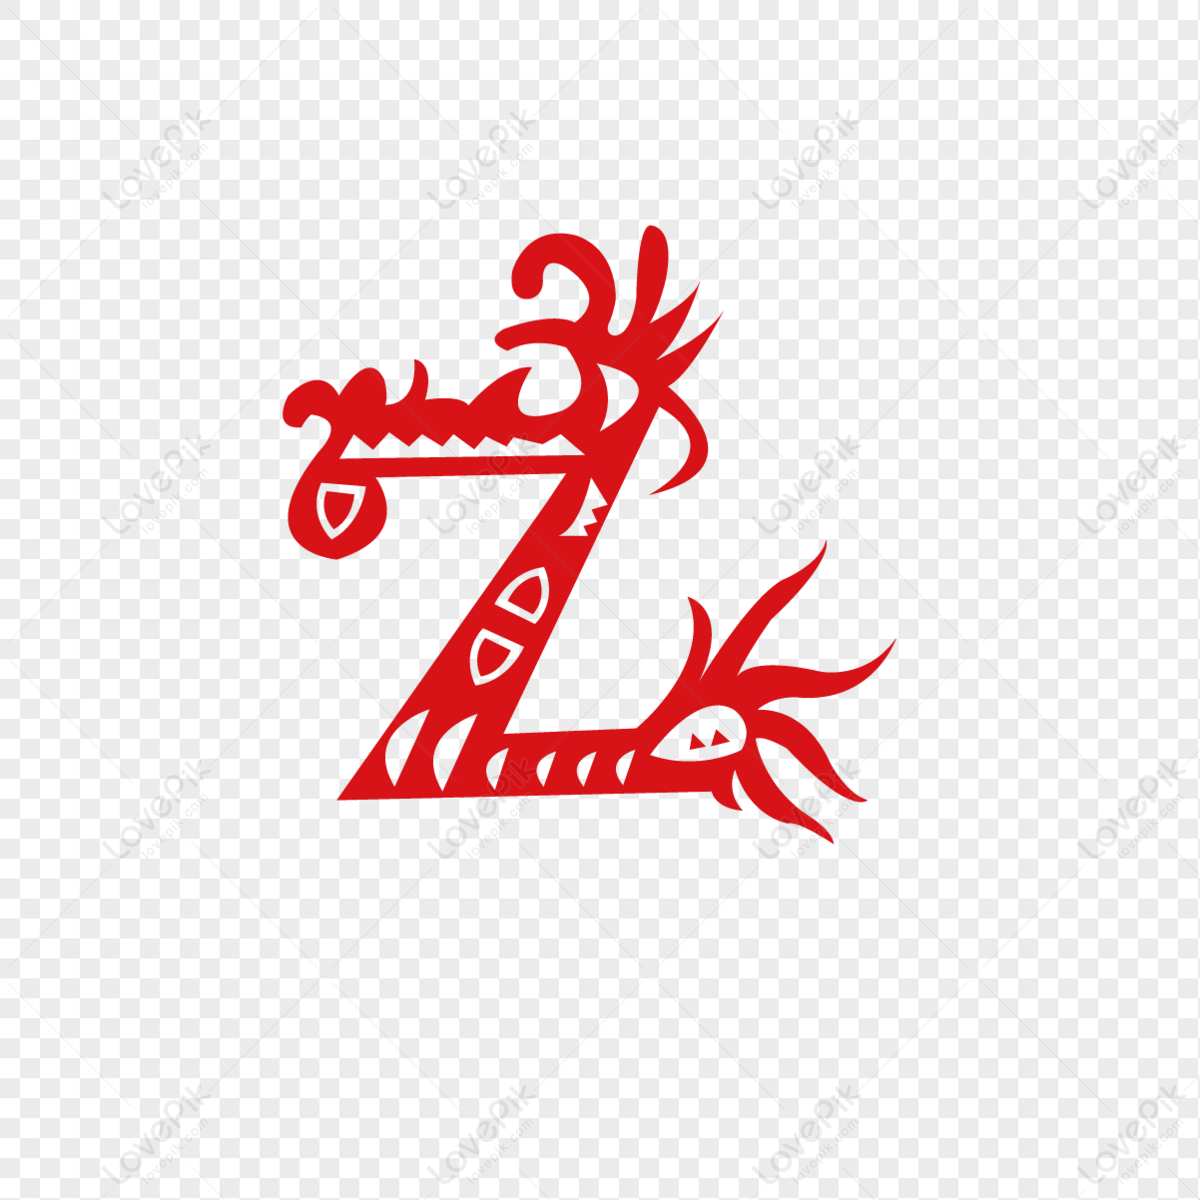 Paper Cut Wind Letter Z PNG Image Free Download And Clipart Image ...